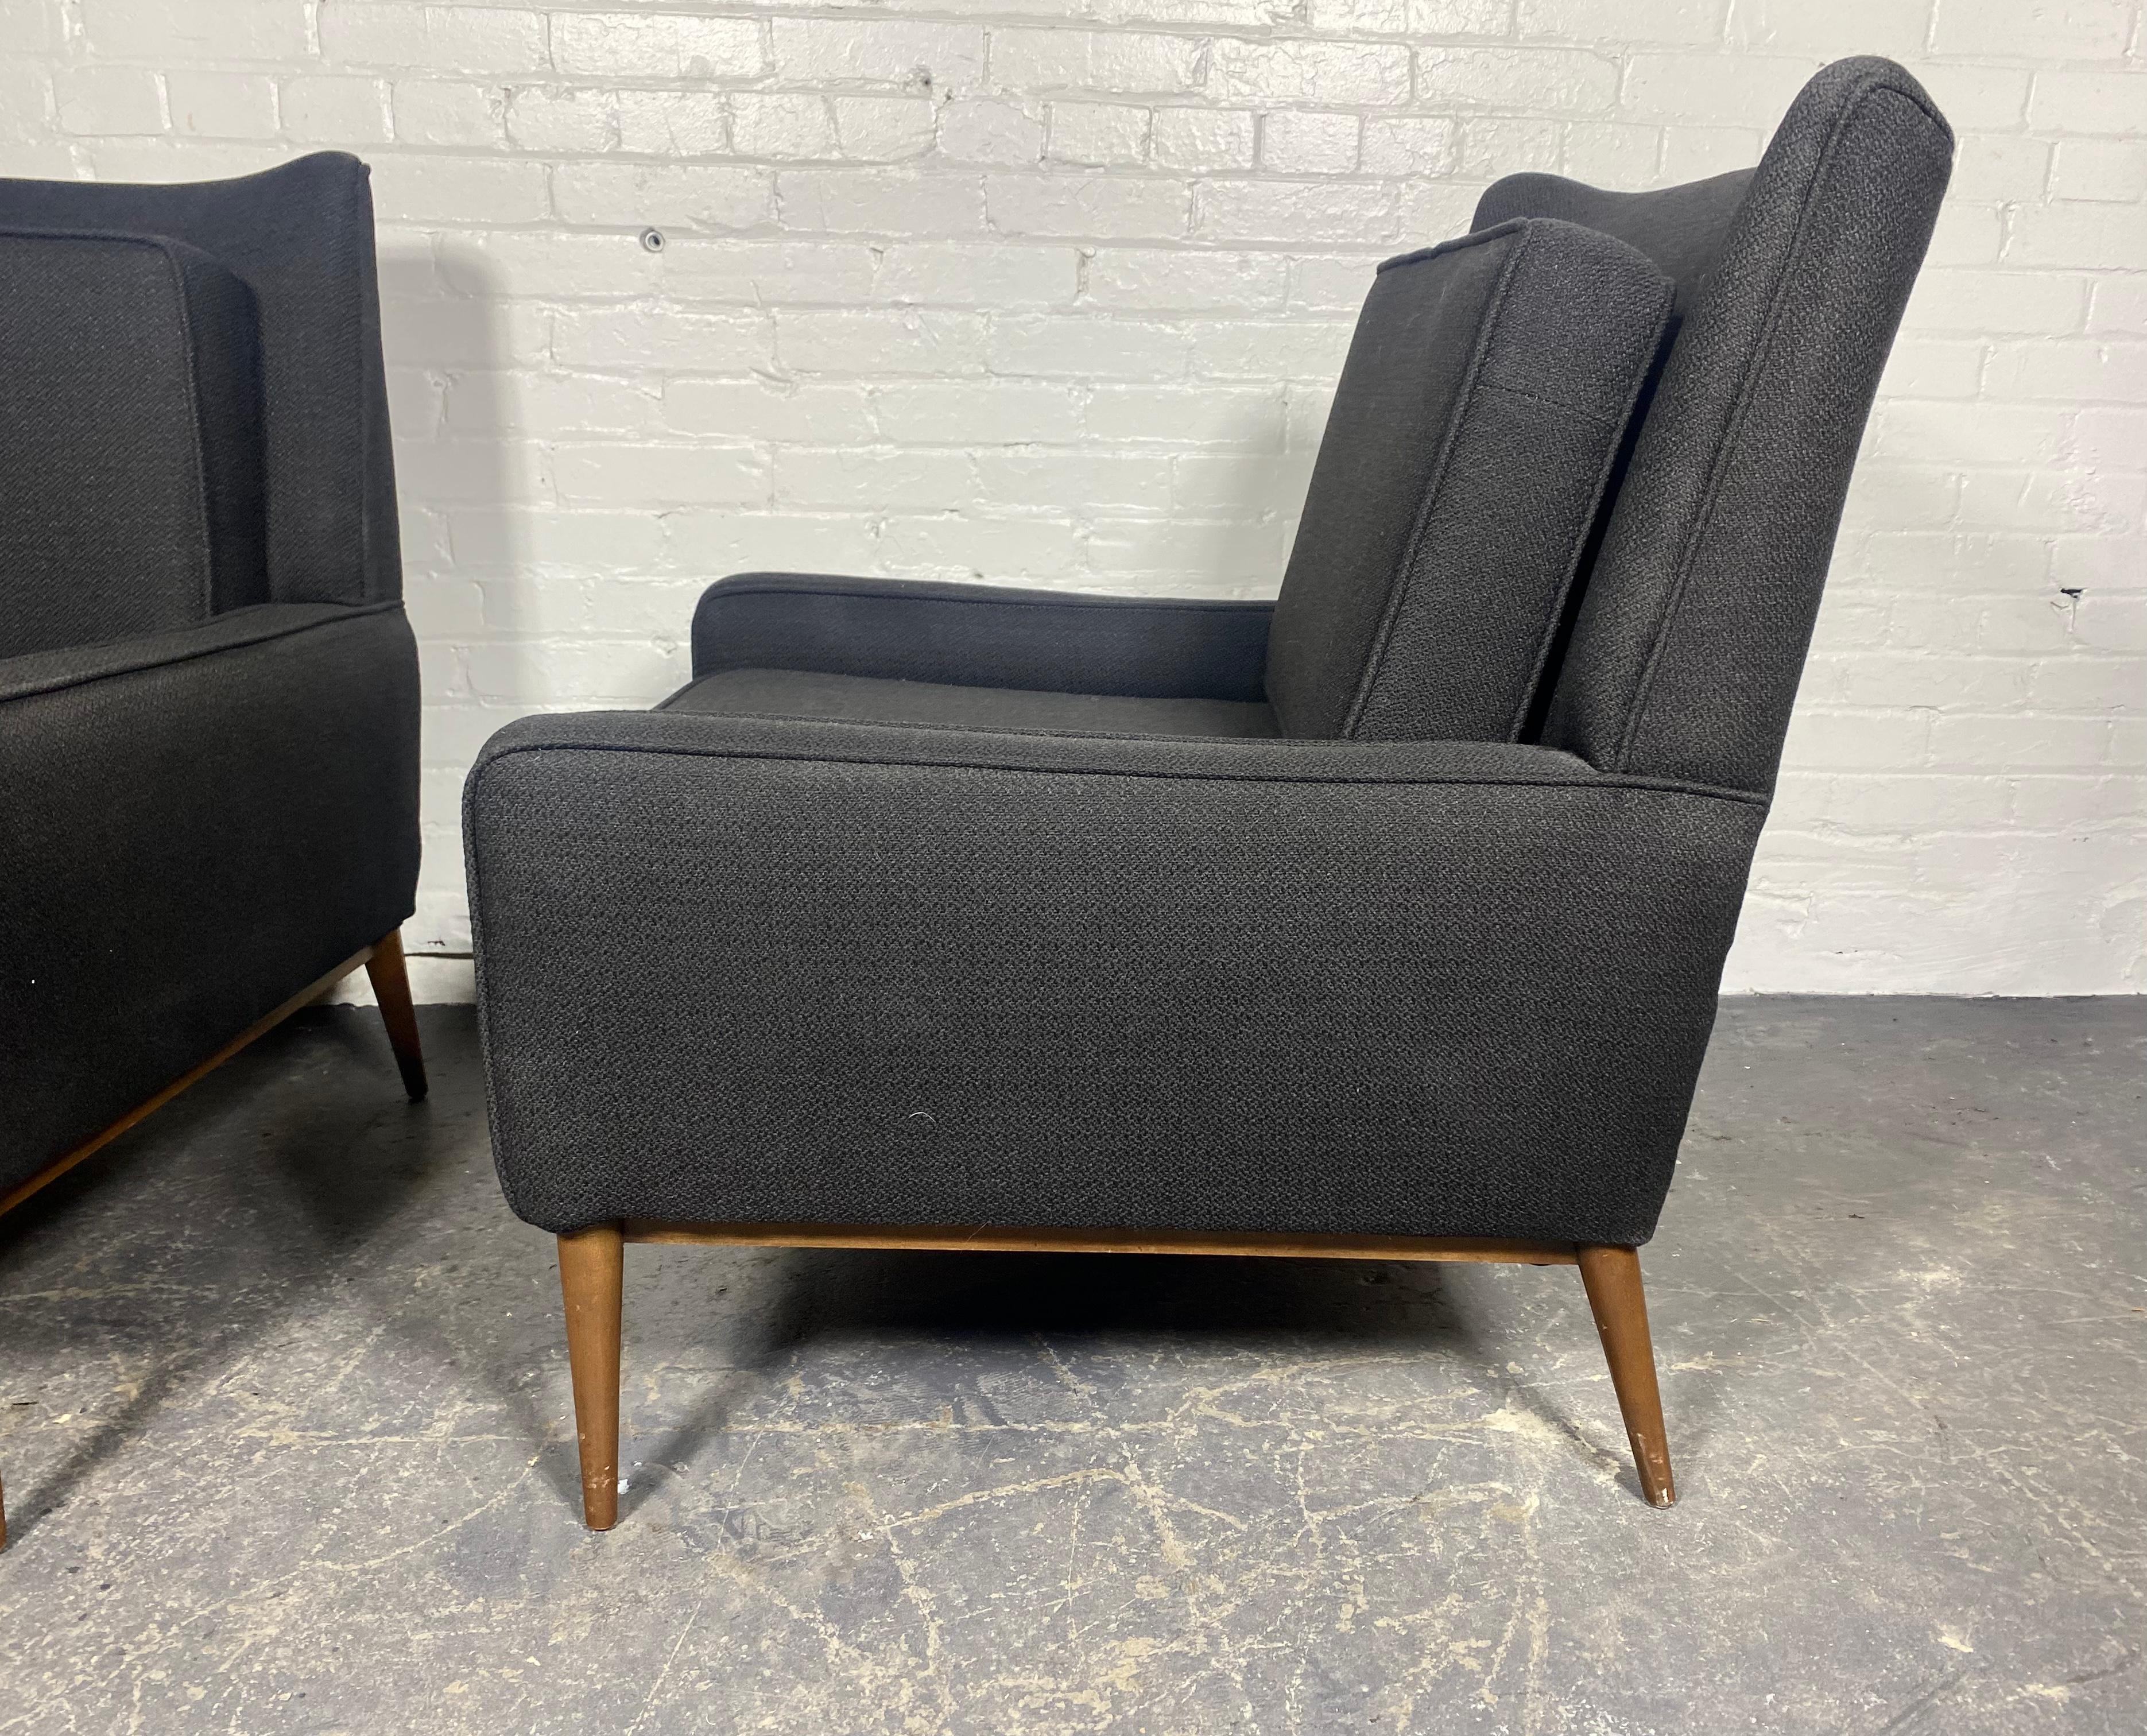 American Classic Pair Modernist Lounge Chairs attributed to Paul McCobb / Directional For Sale